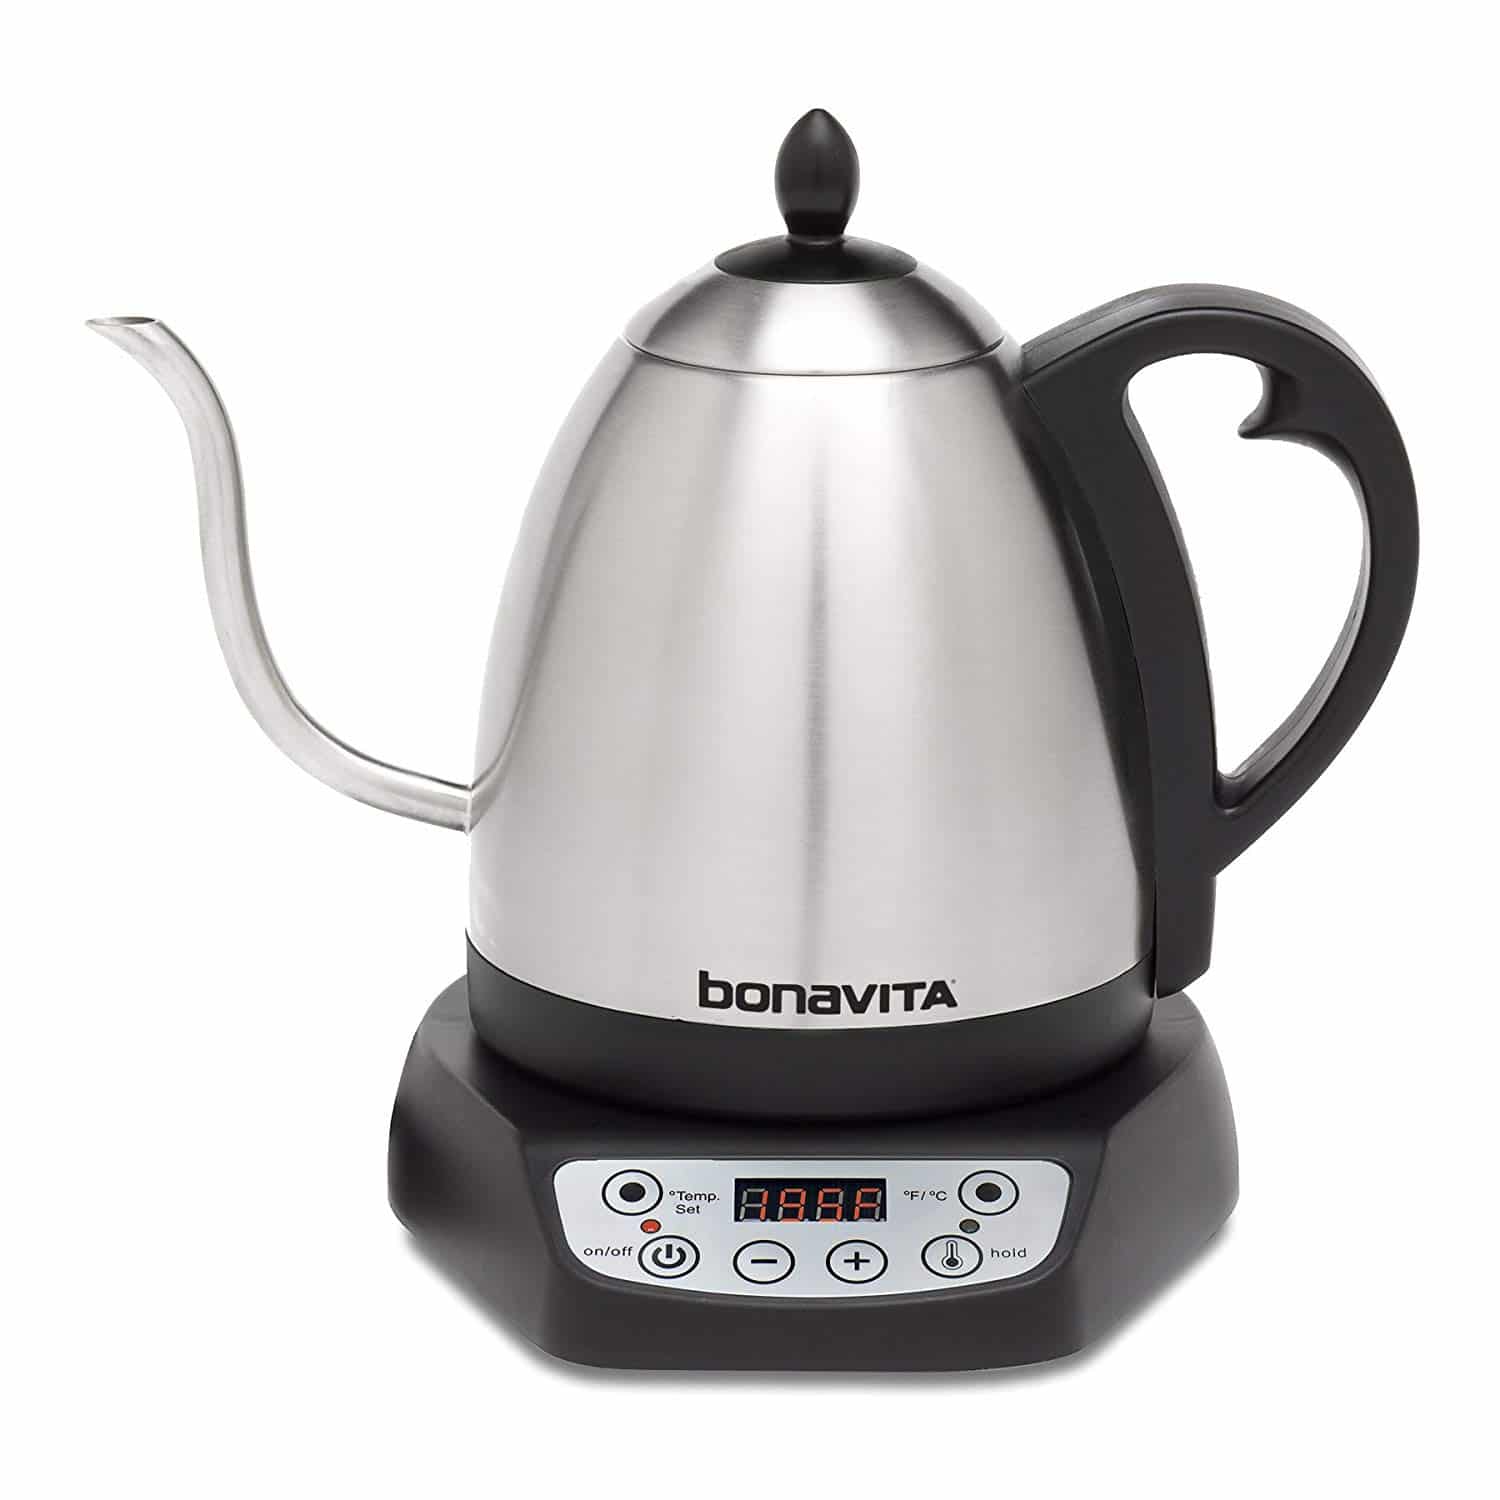 Ovente Glass Electric Kettle KG83B In-depth Review